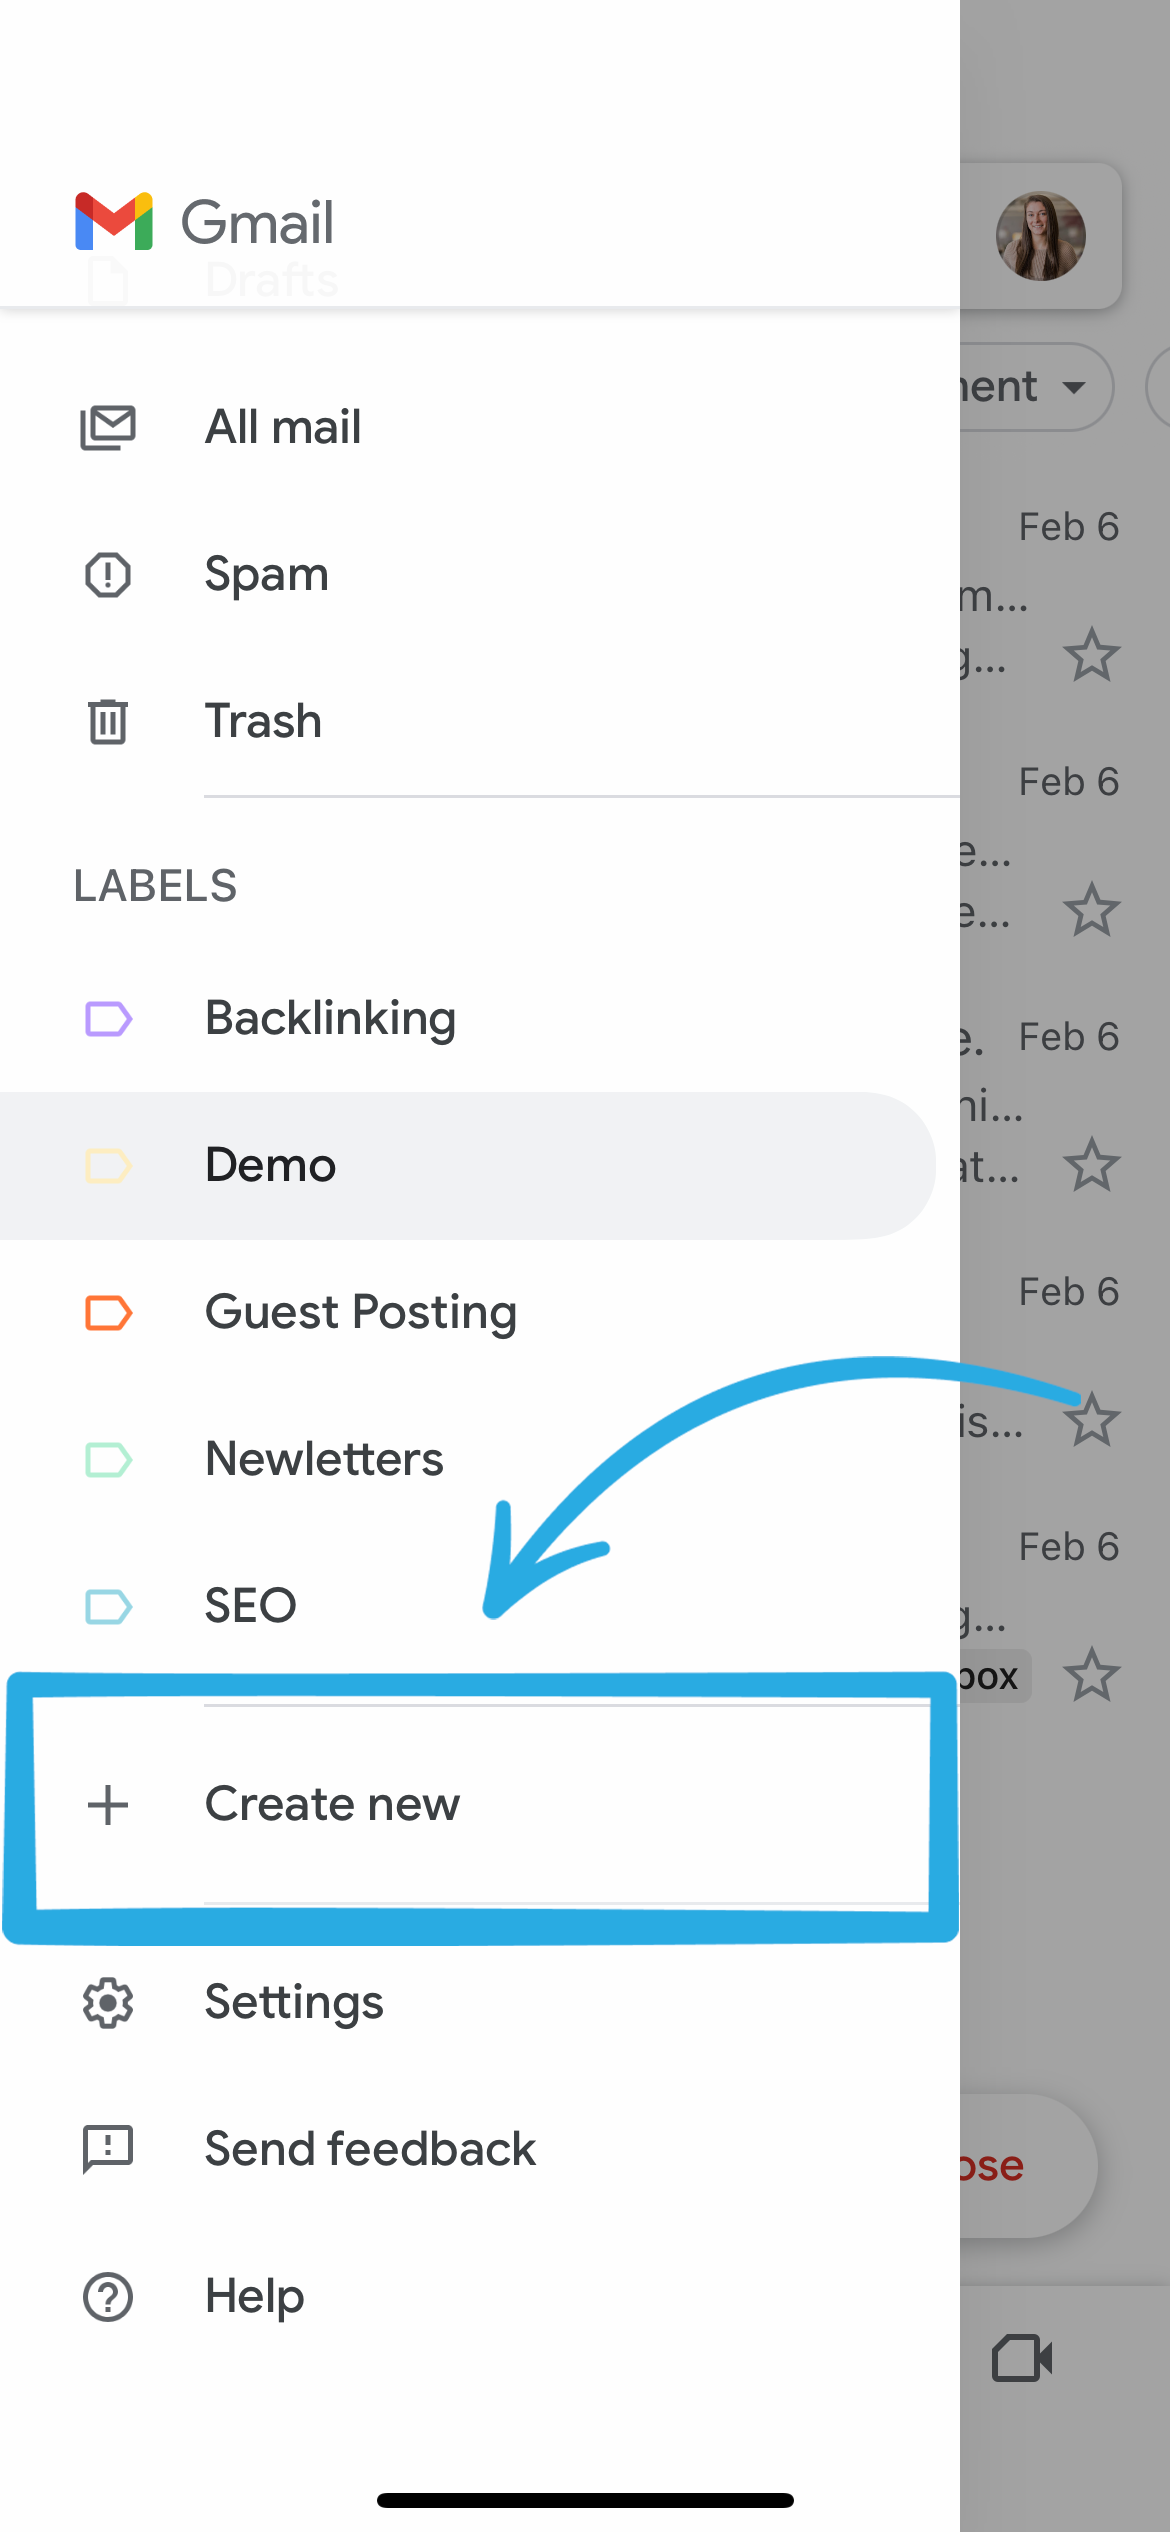 How to create folders in Gmail on mobile: Step 2